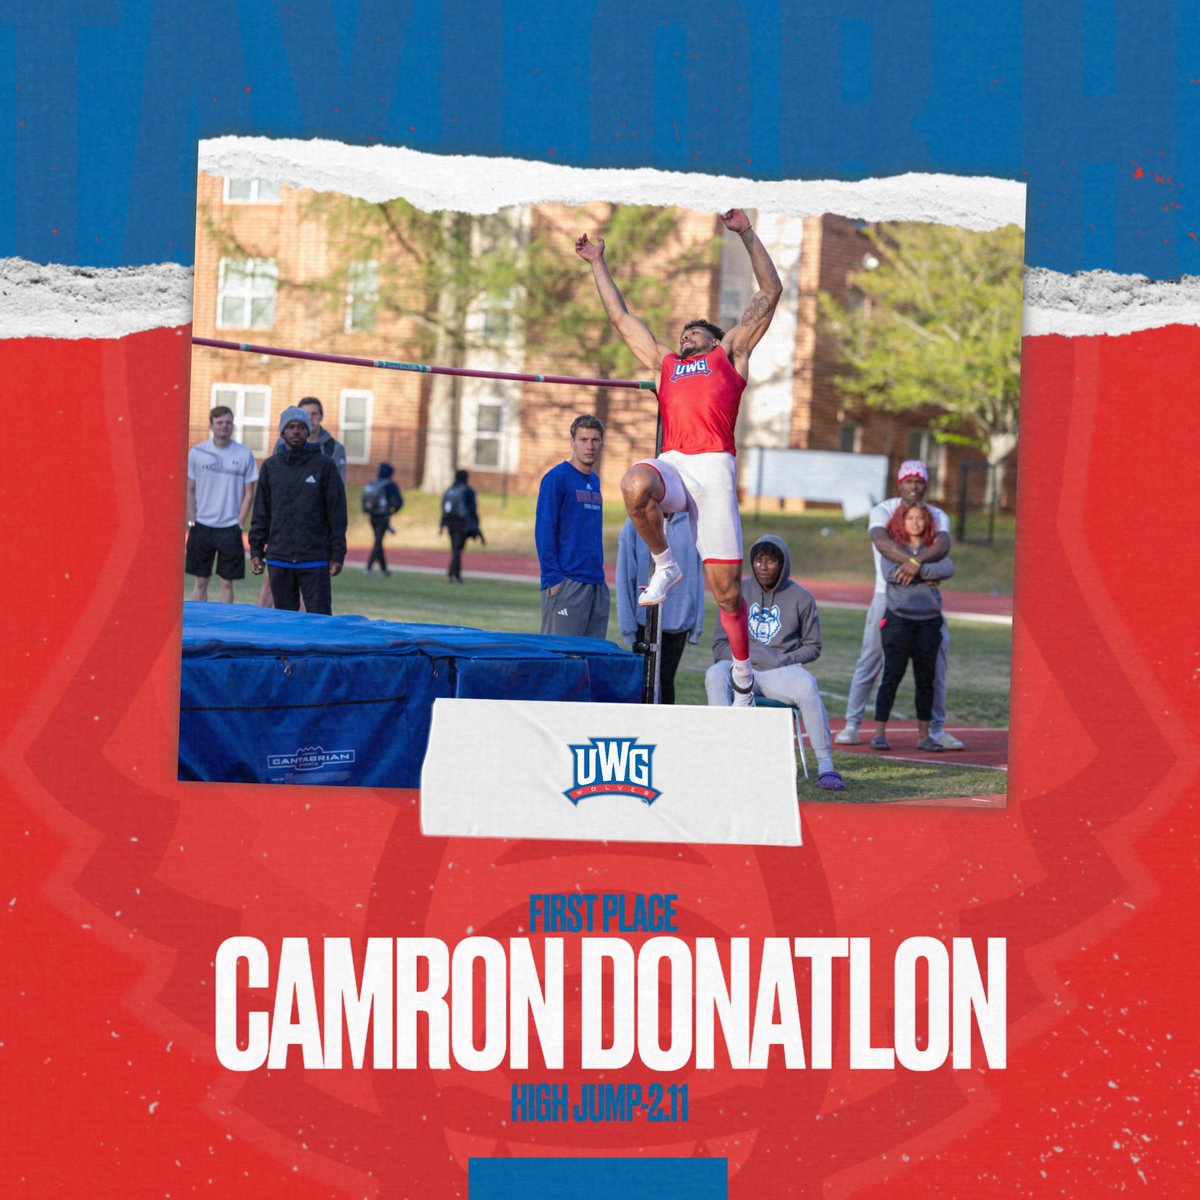 Proud of our guy @DonatlanCamron for competing AGAIN on a national level! 😤 #WeRunTogether